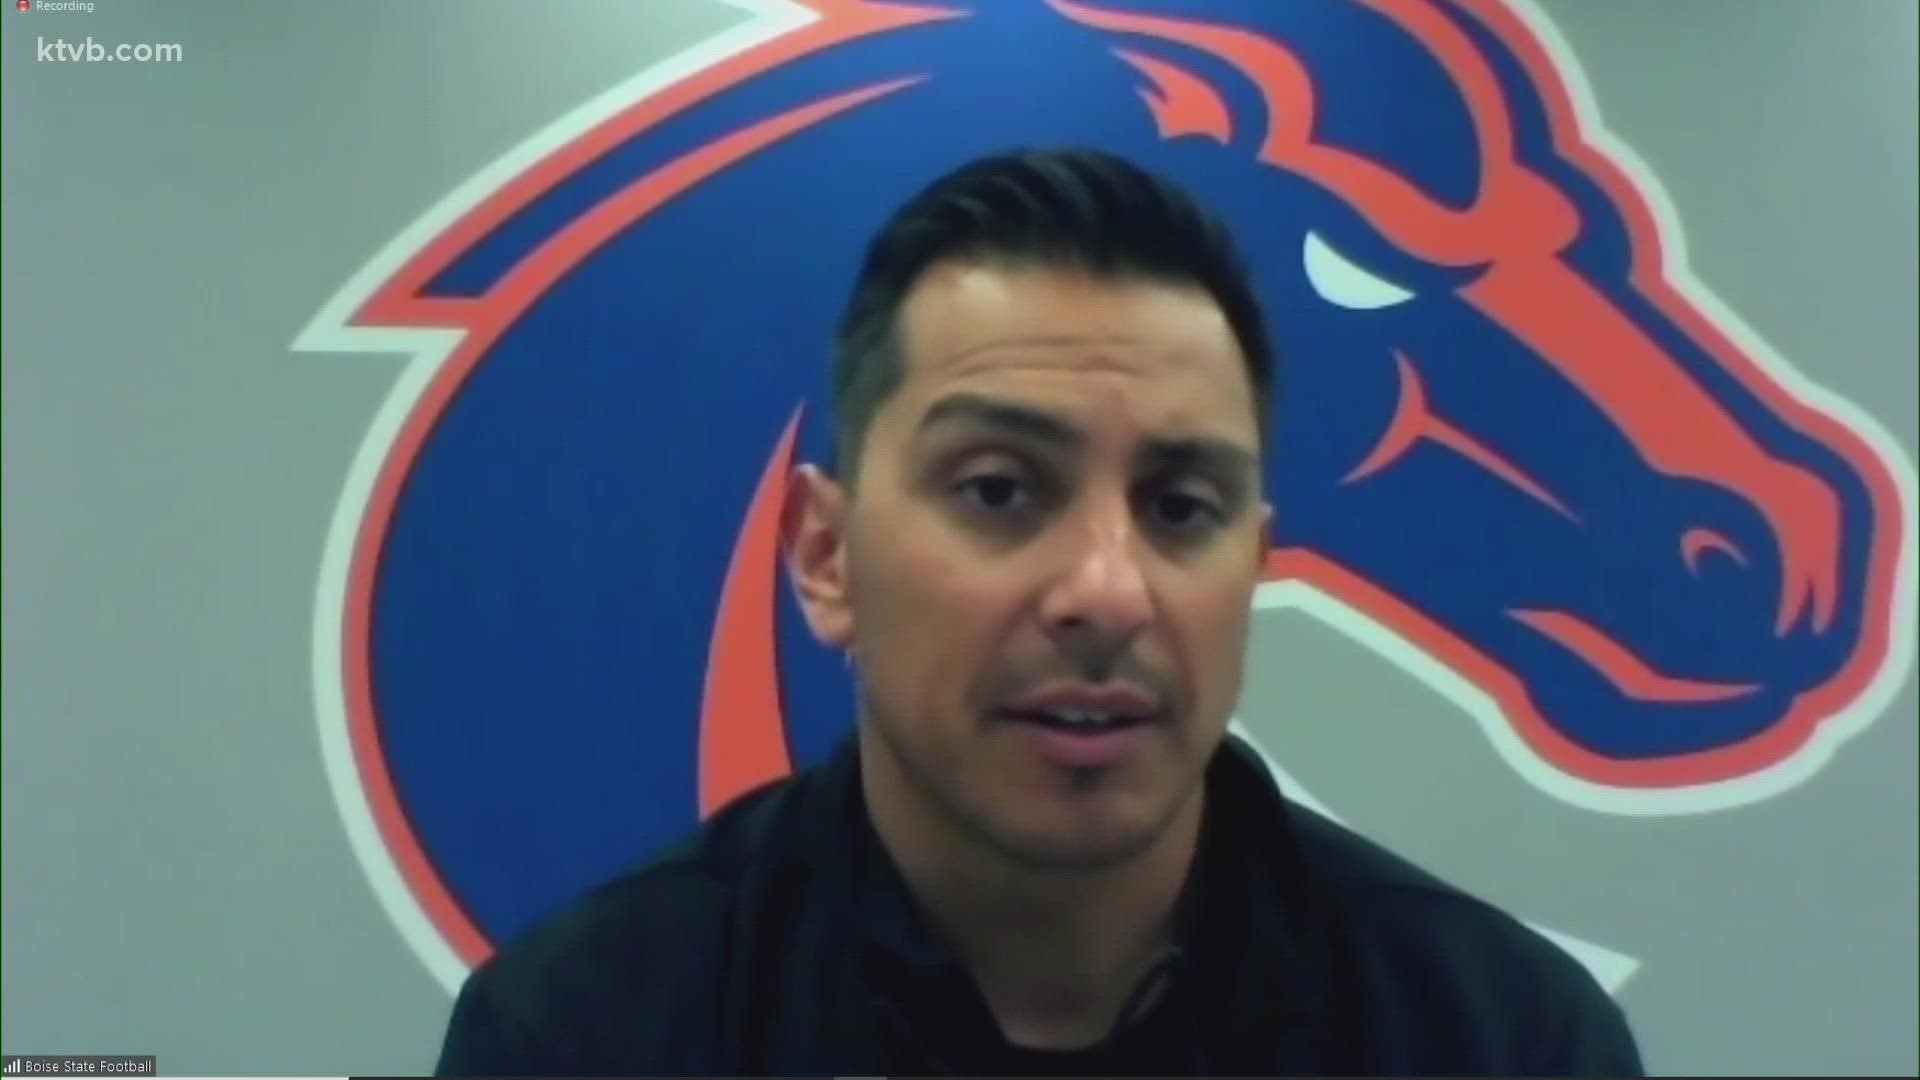 This is Andy Avalos' full press conference on Monday, ahead of Boise State's game against Colorado State.